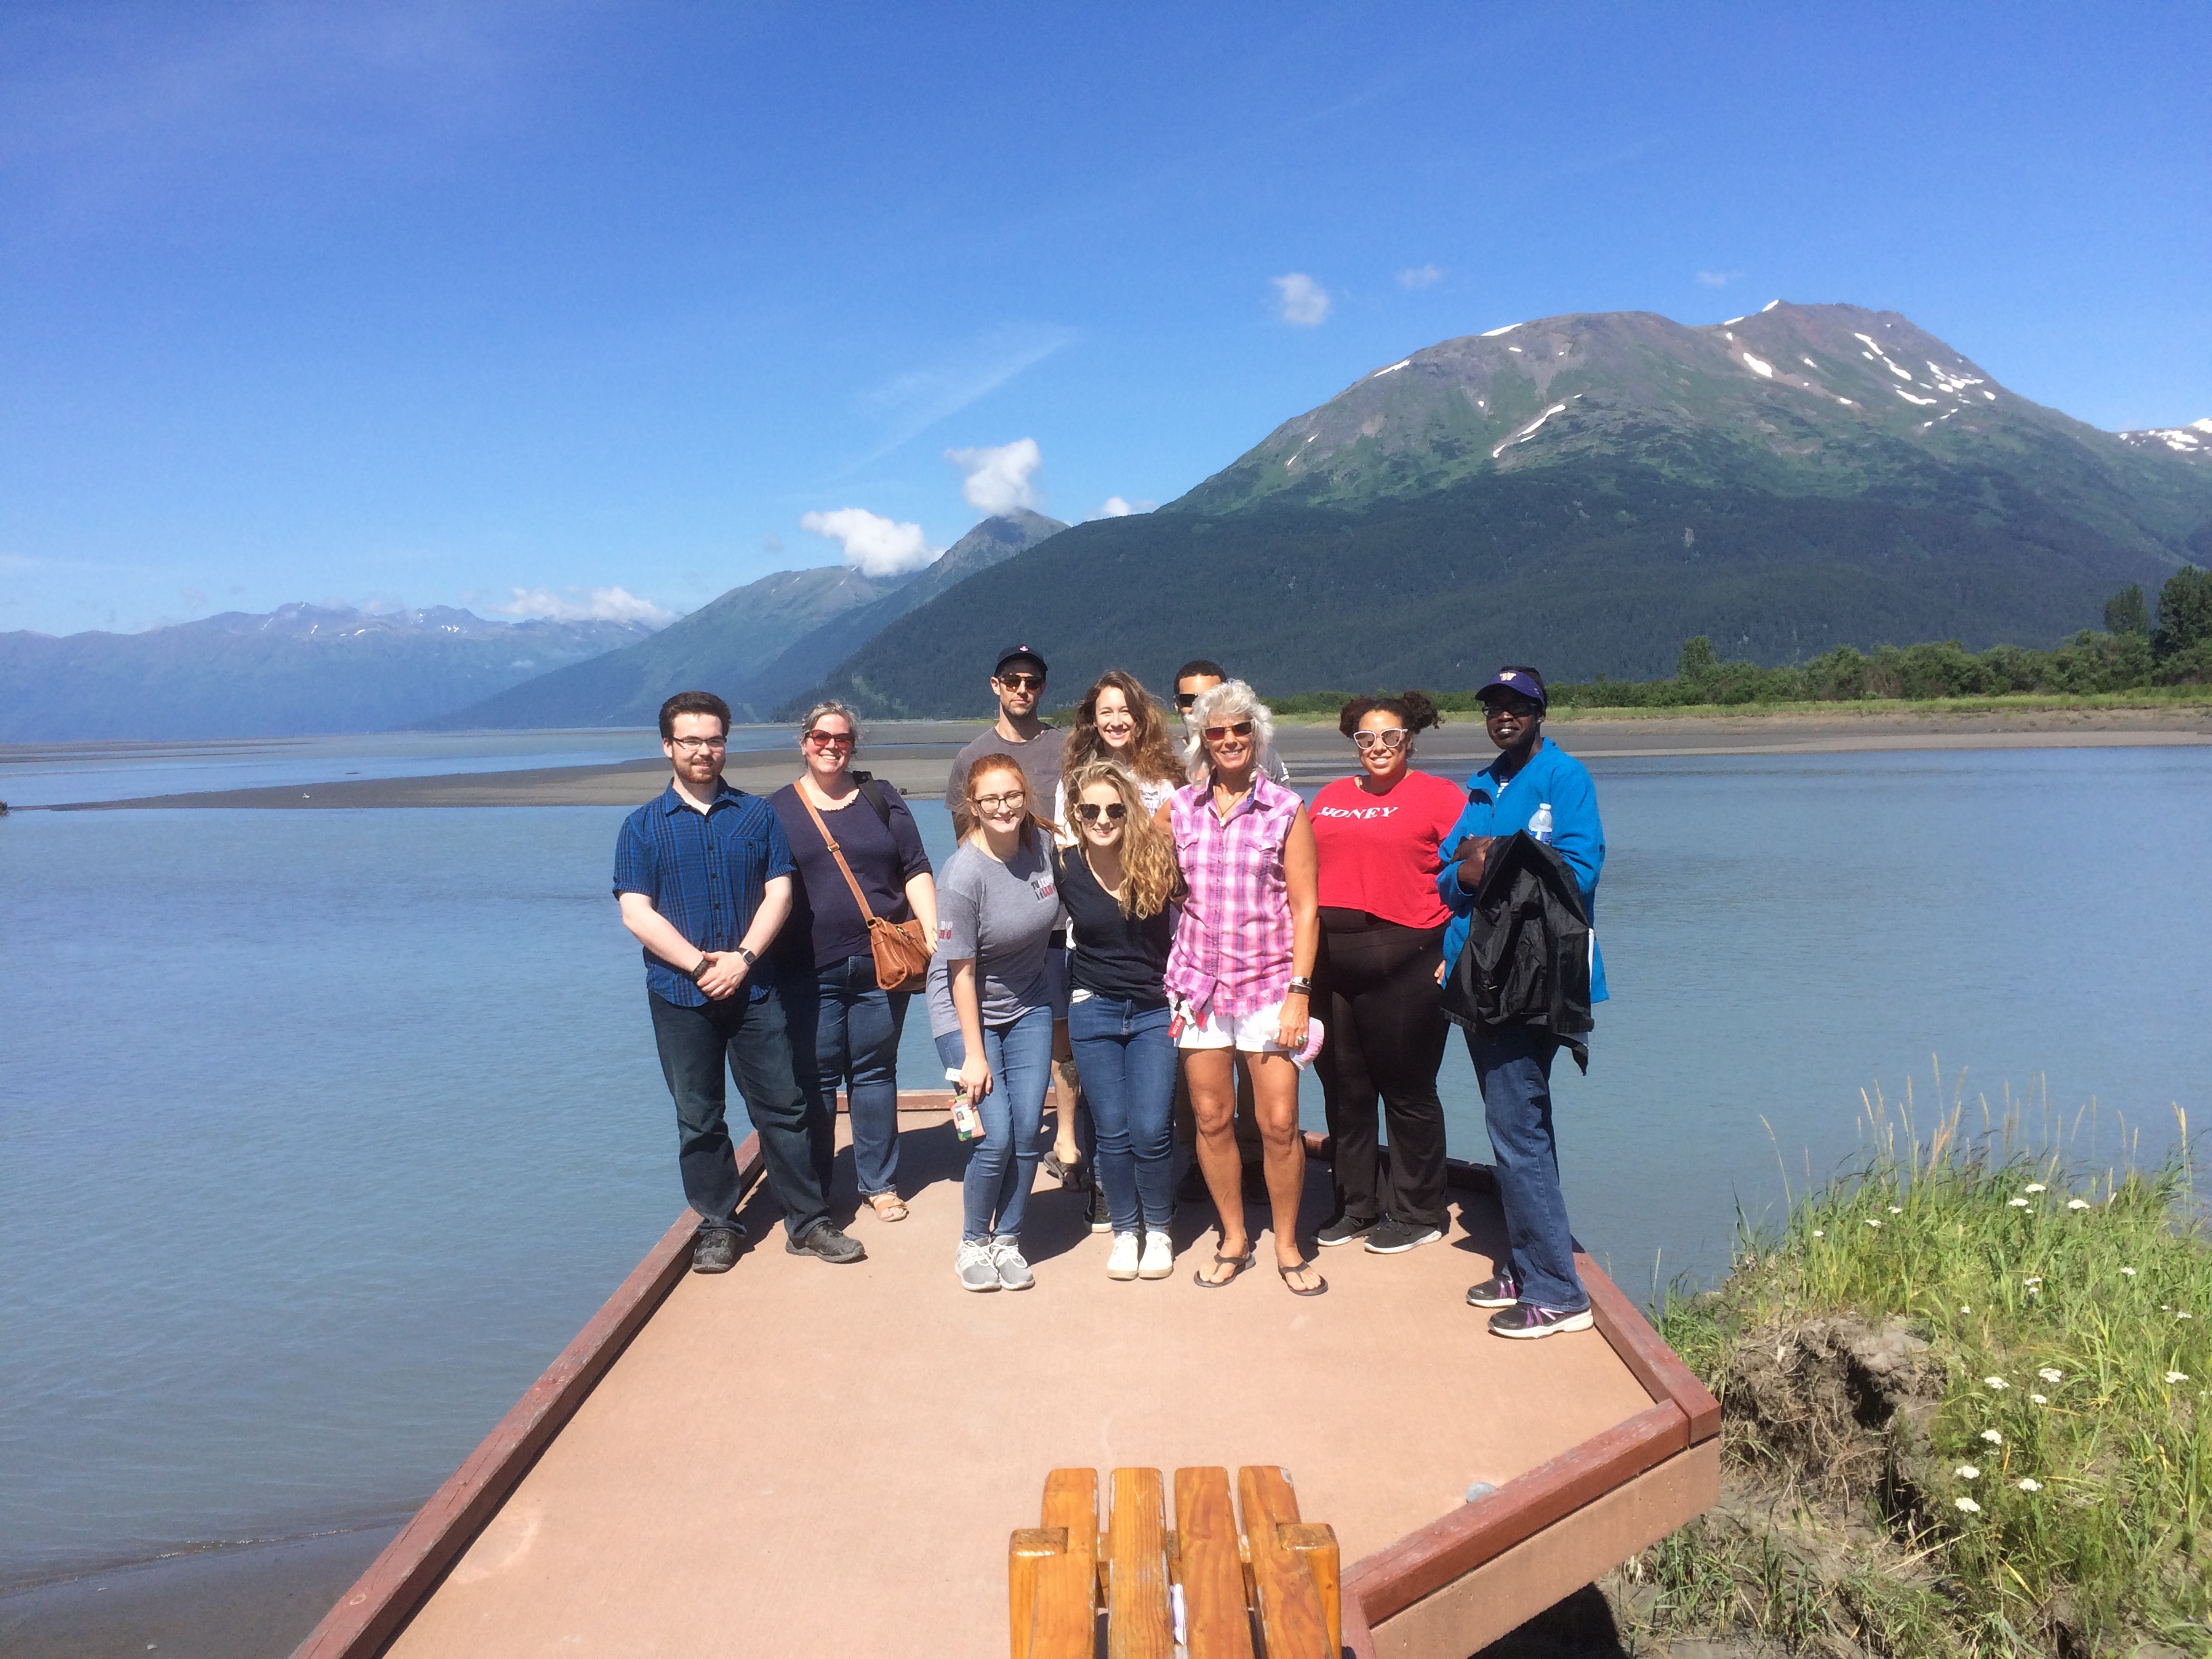 Riin students in front of a lake